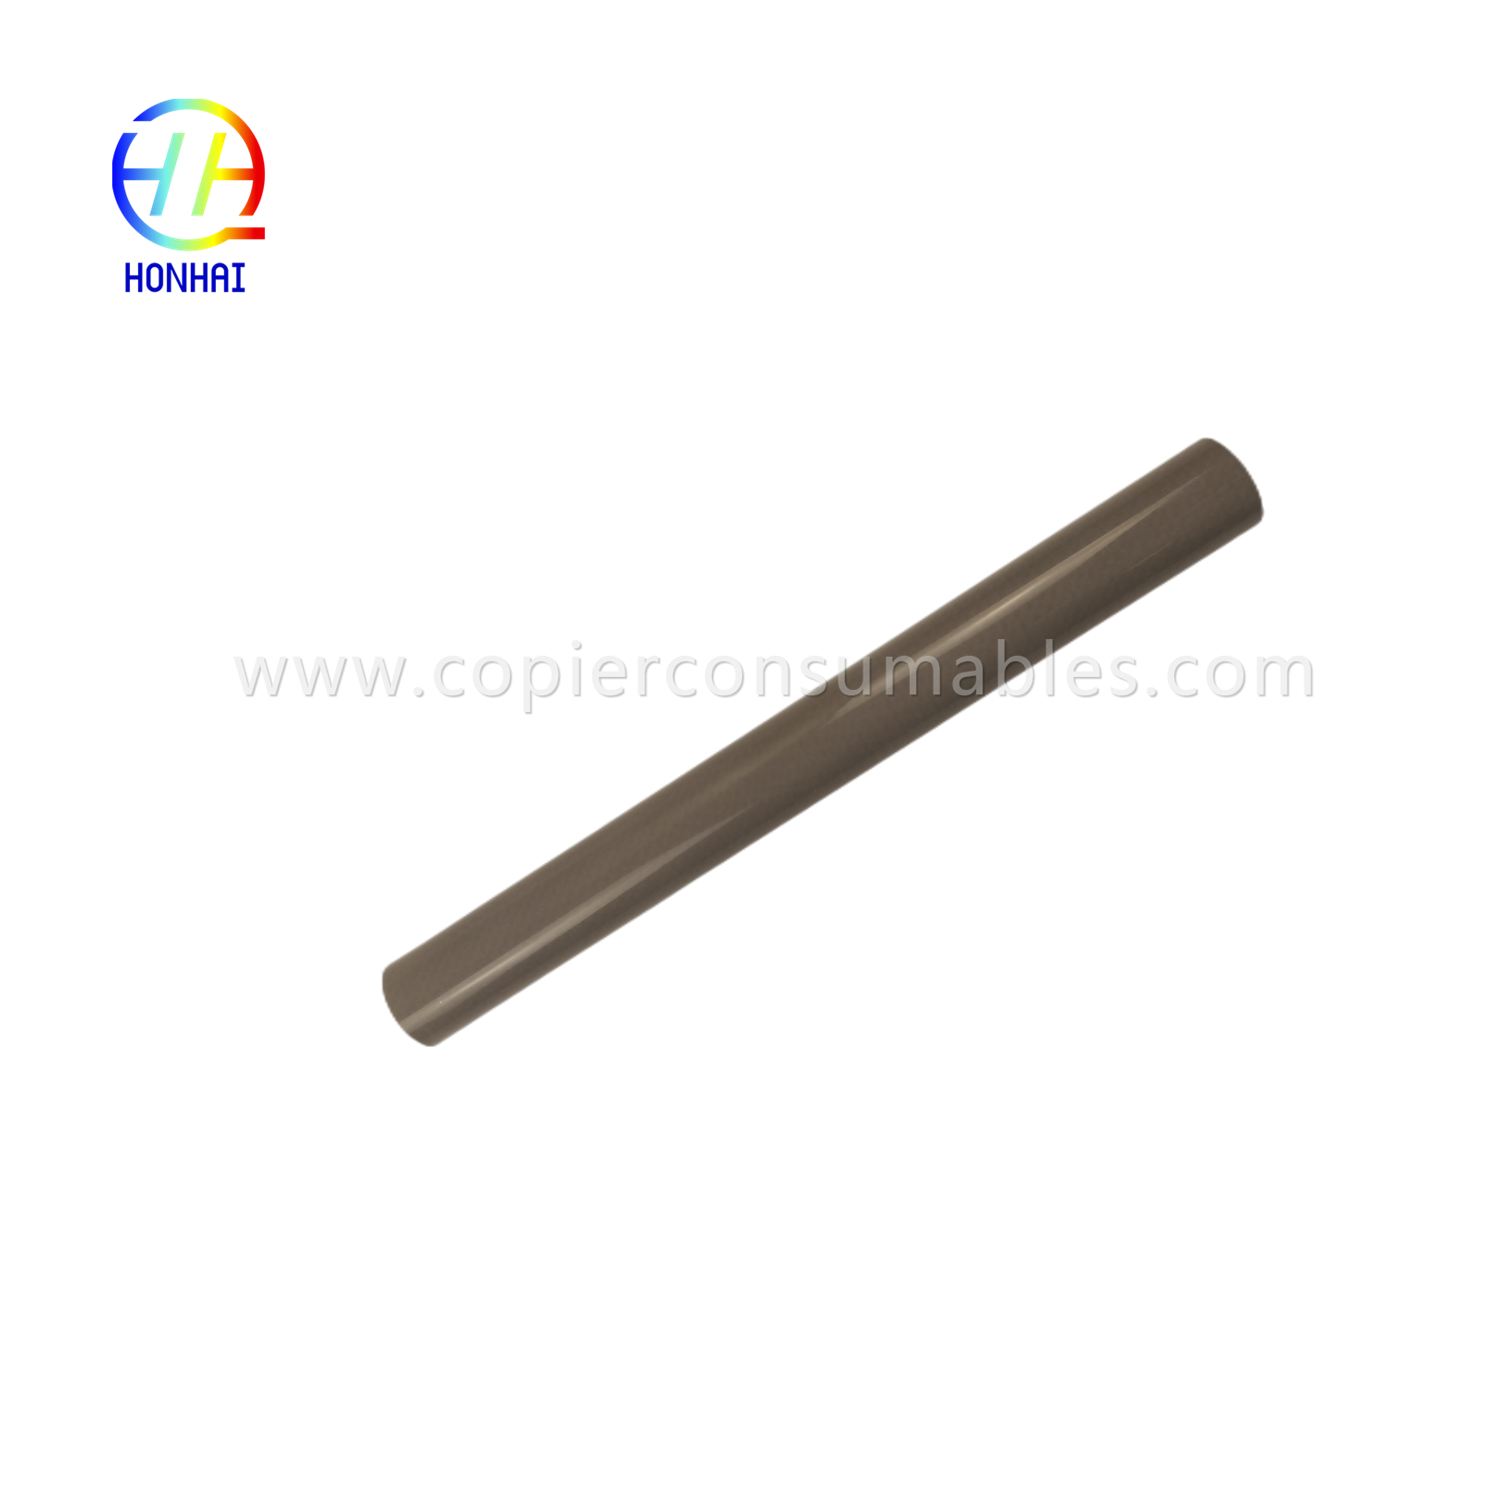 https://www.copierconsumables.com/fuser-film-sleeve-for-samsung-scx-8230na-8240na-8030nd-8040nd-clx920192519301-jc66-03102a